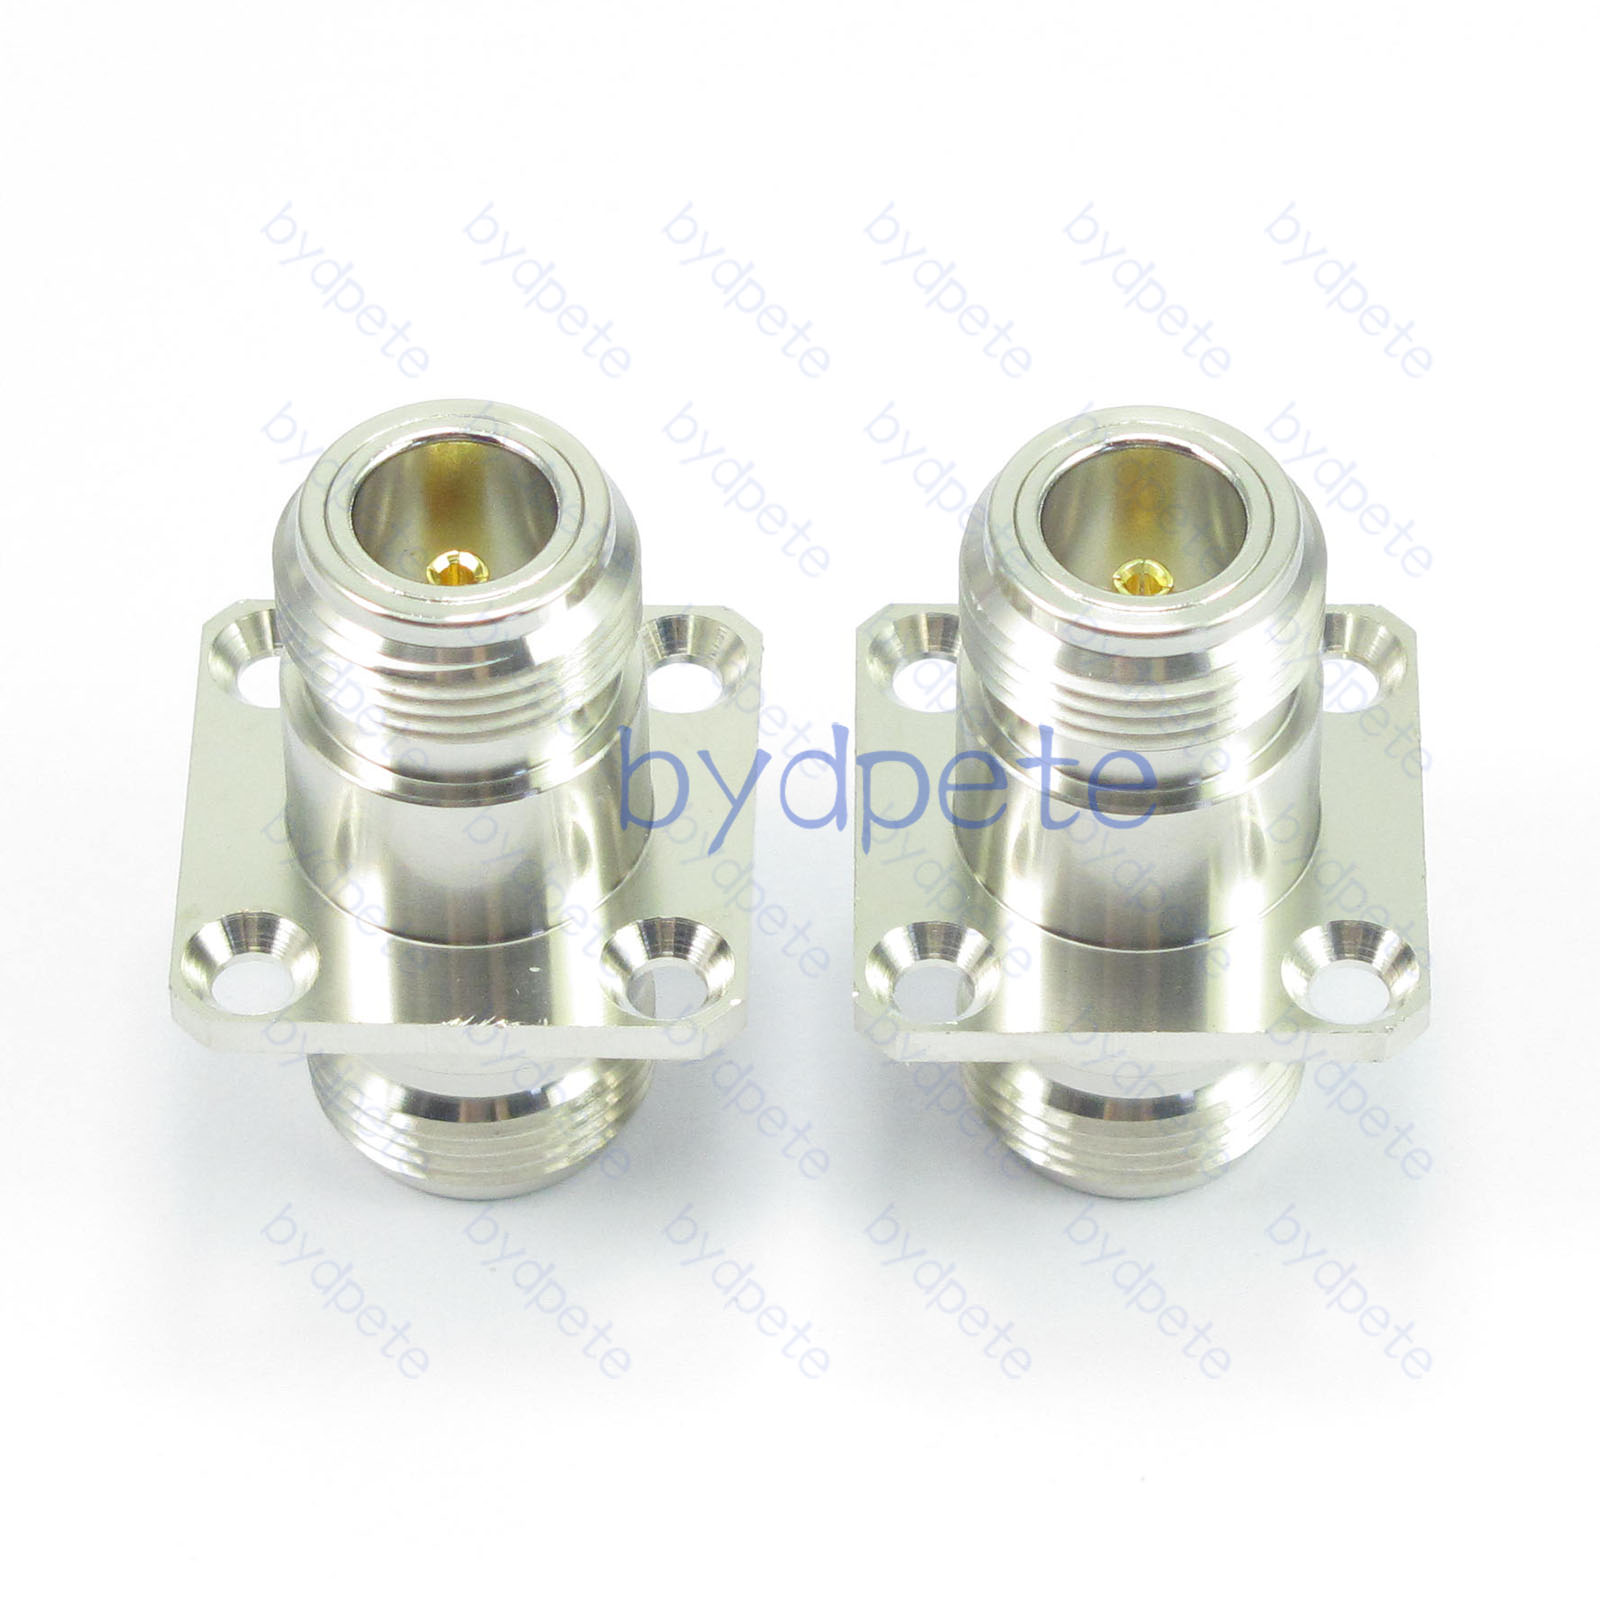 N Female Jack to N Female Jack 4 Holes Square Panel Straight RF Connector Adapter bydpete BYDB031NH4